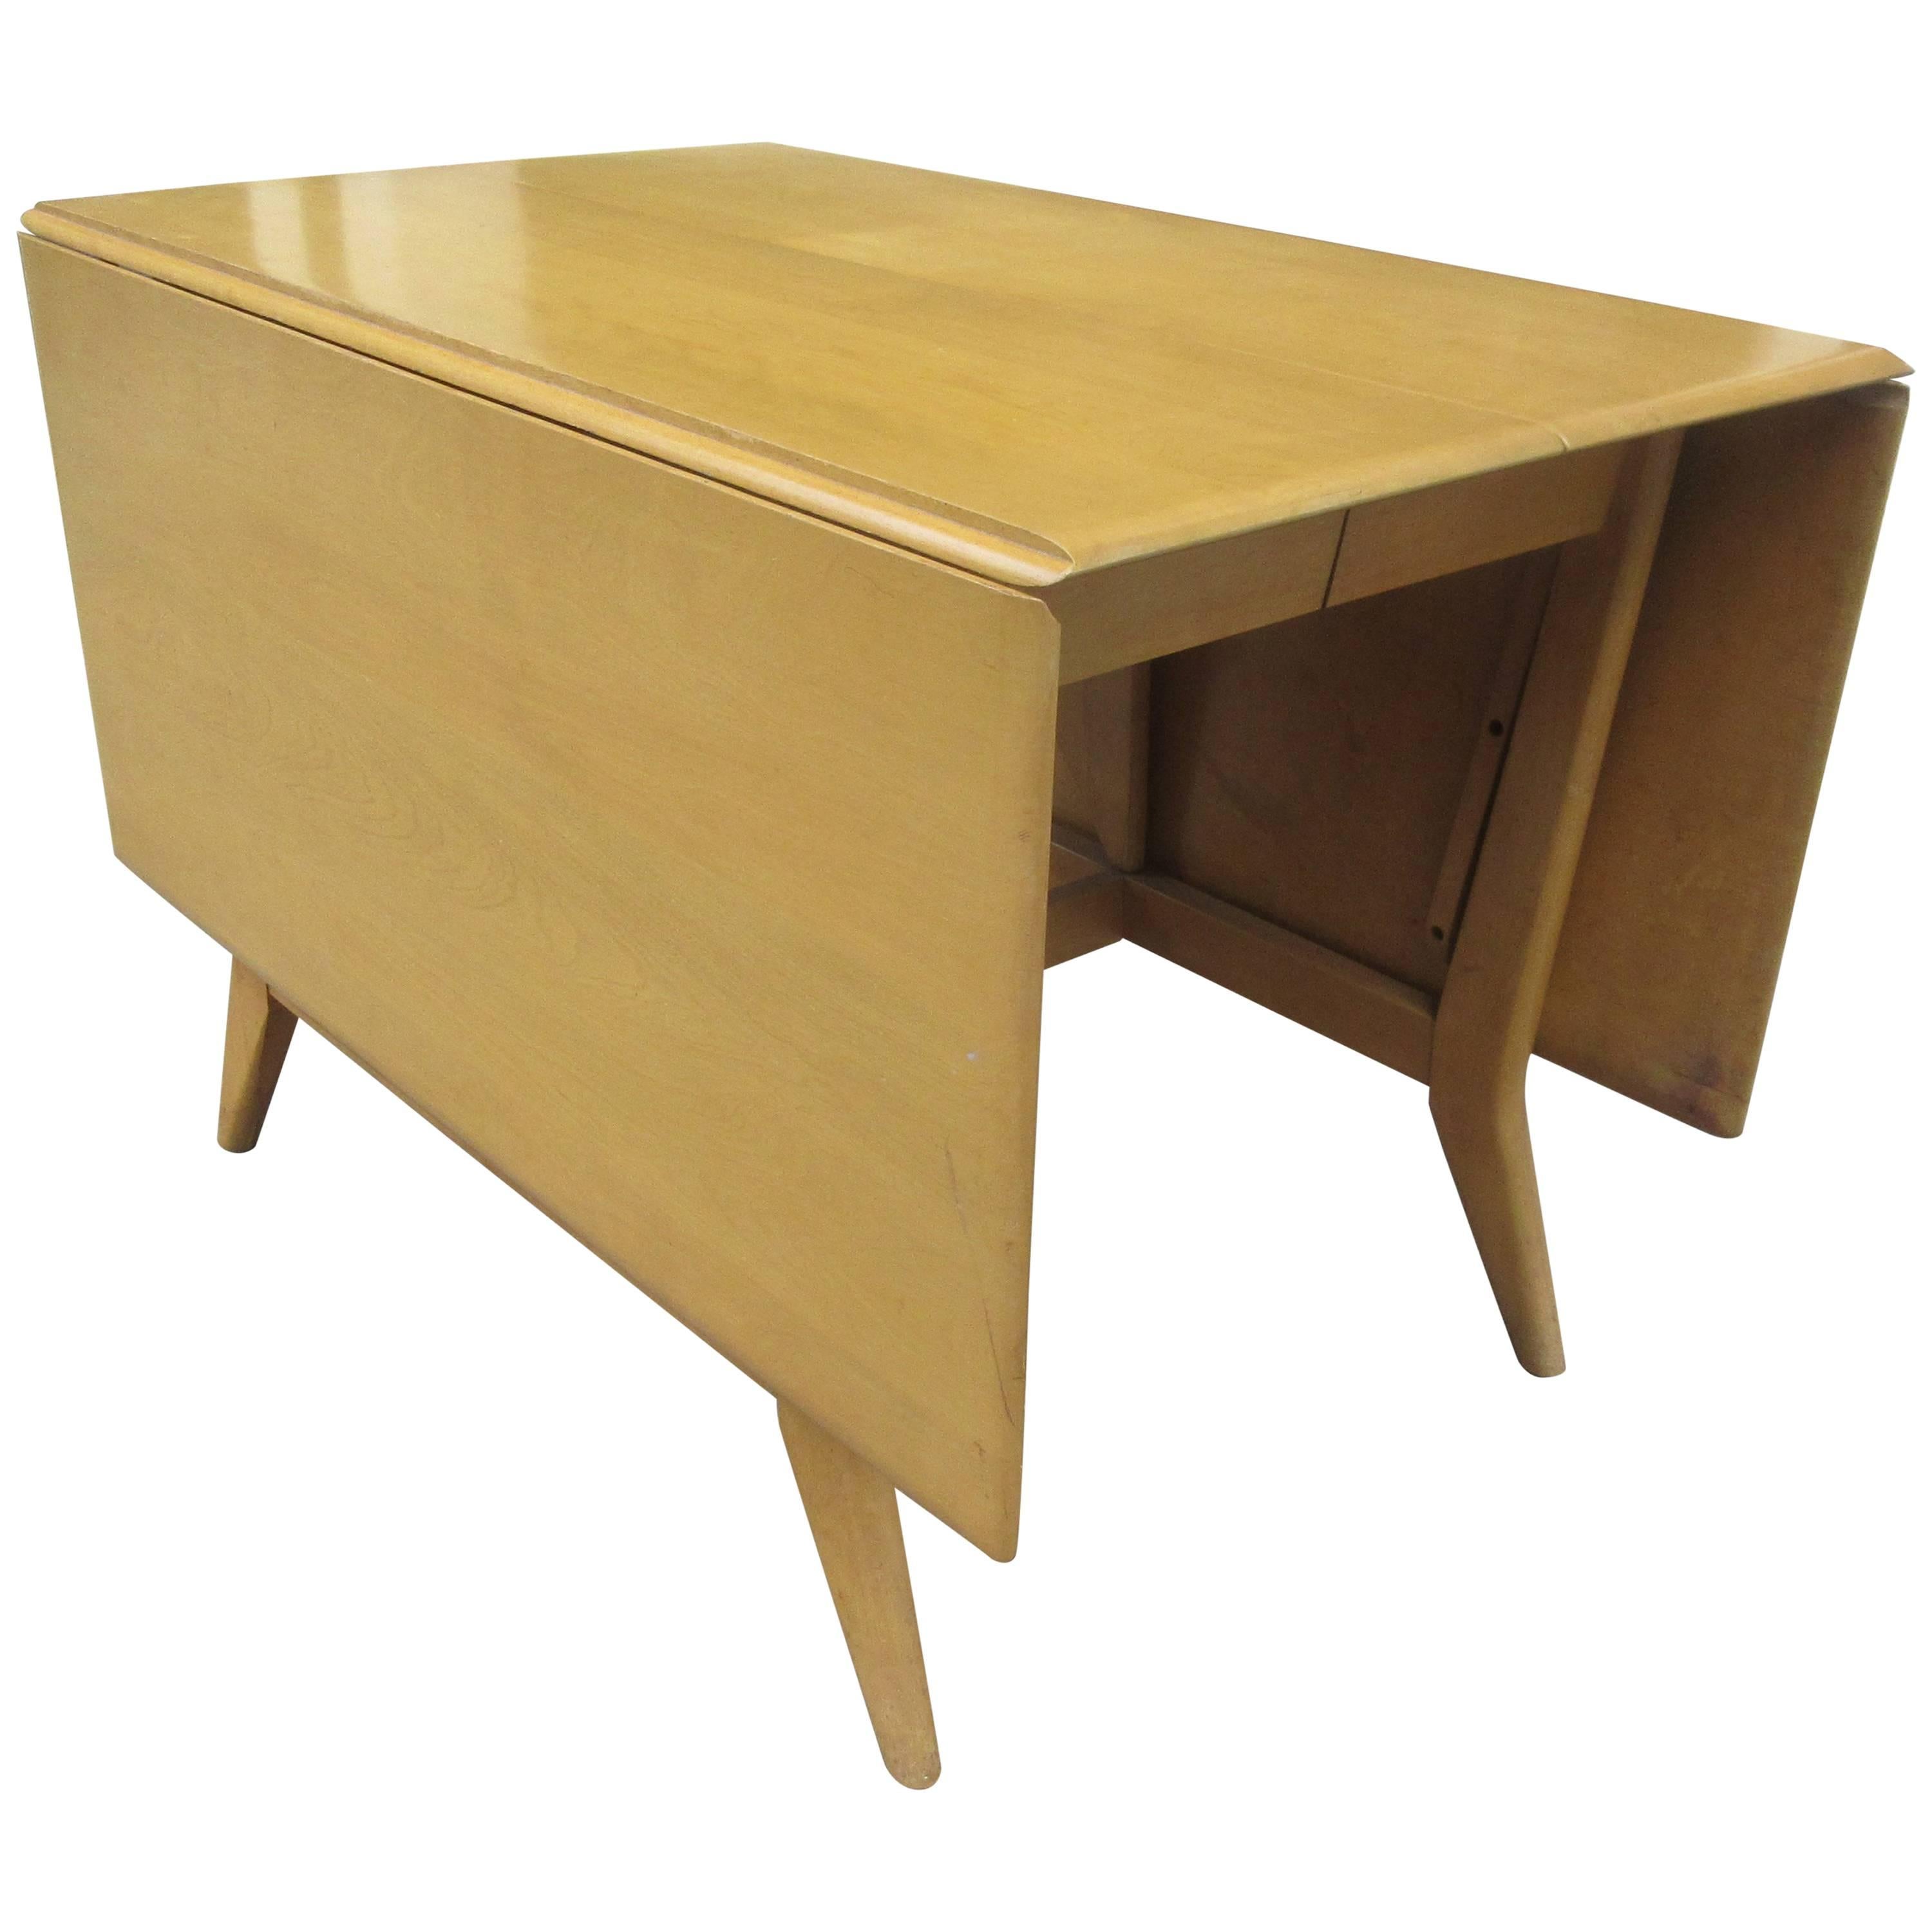 Heywood Wakefield Drop Leaf Table with Two Additional Leaves